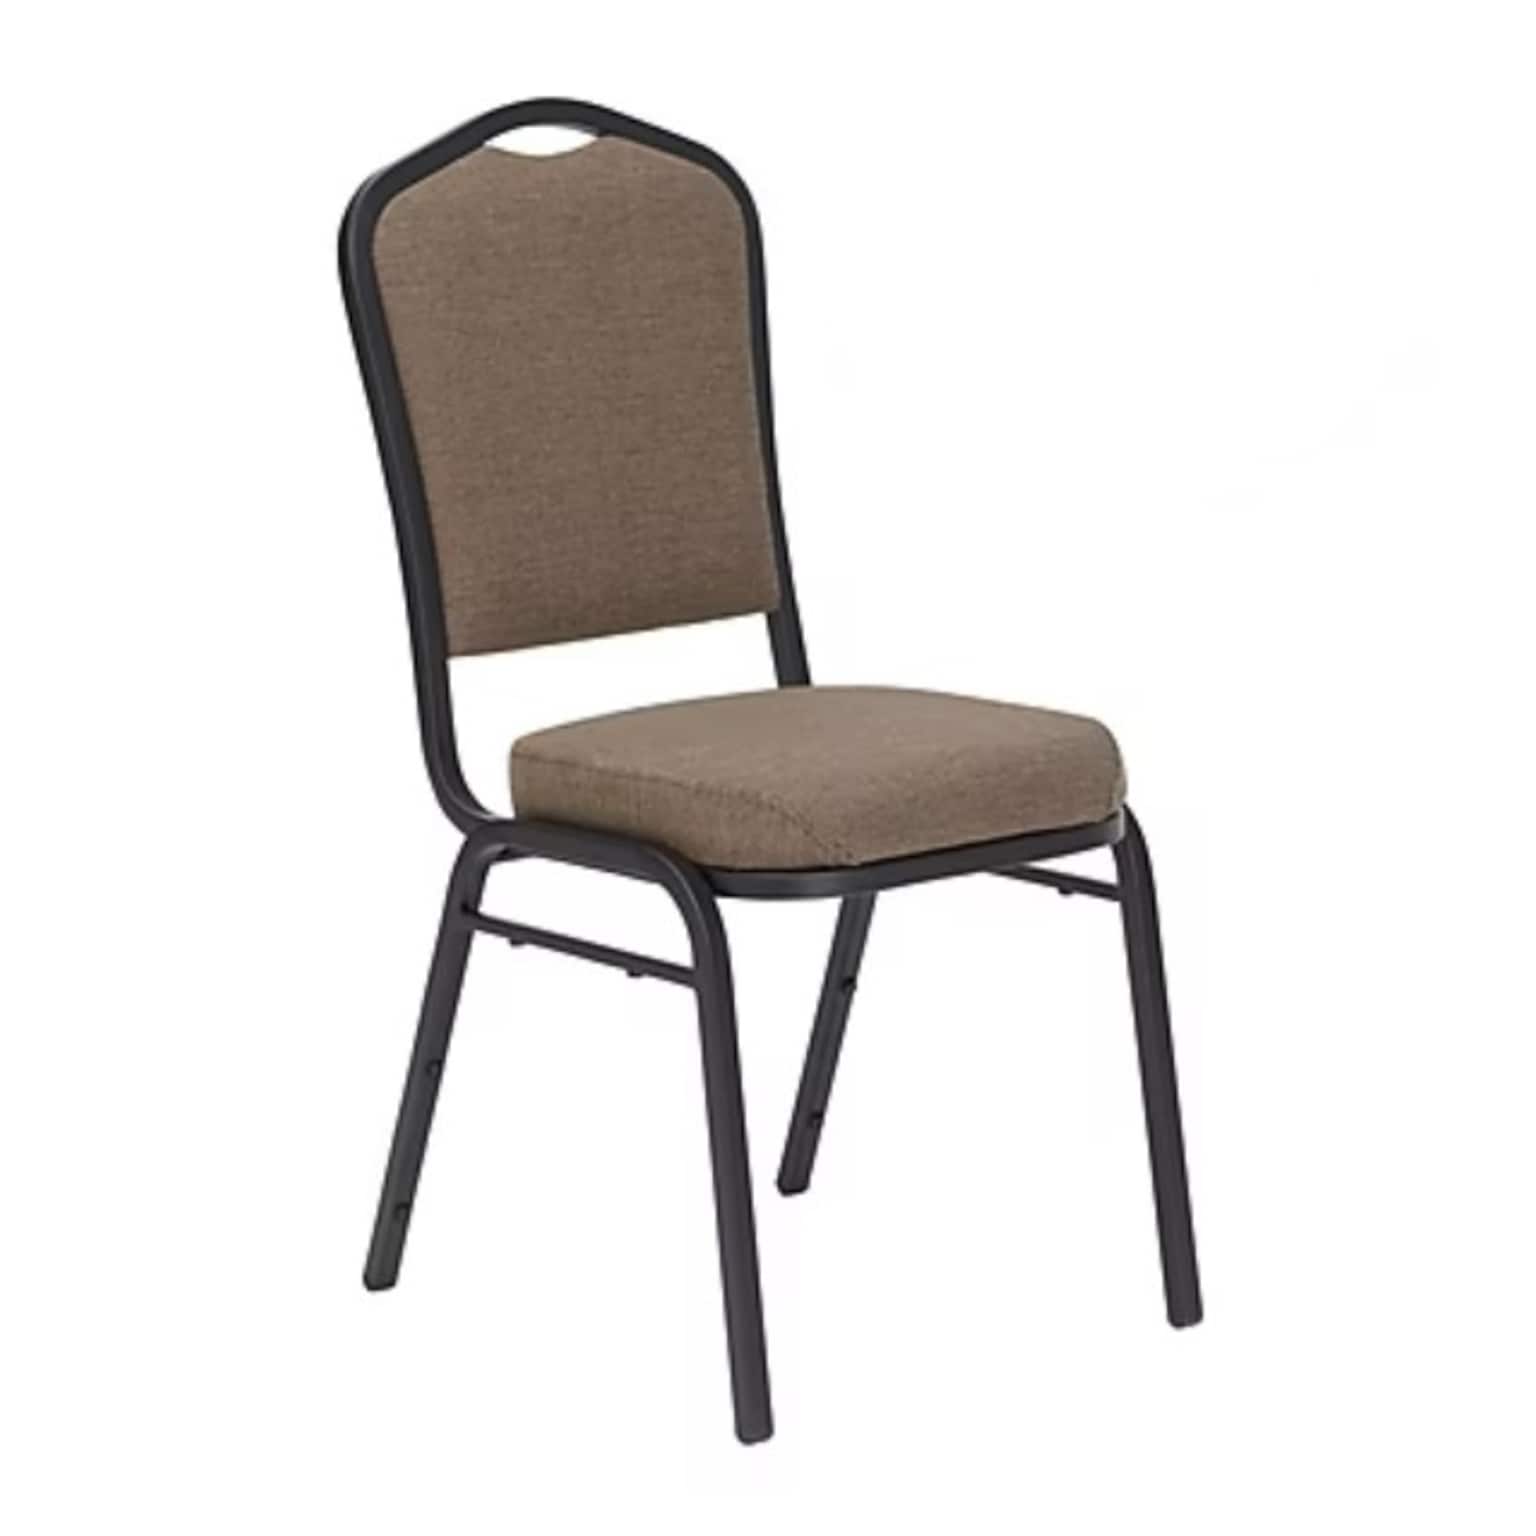 NPS 9300 Series Deluxe Fabric Upholstered Stack Chair, Natural Taupe/Black Sandtex, 80 Pack (9378-BT/80)